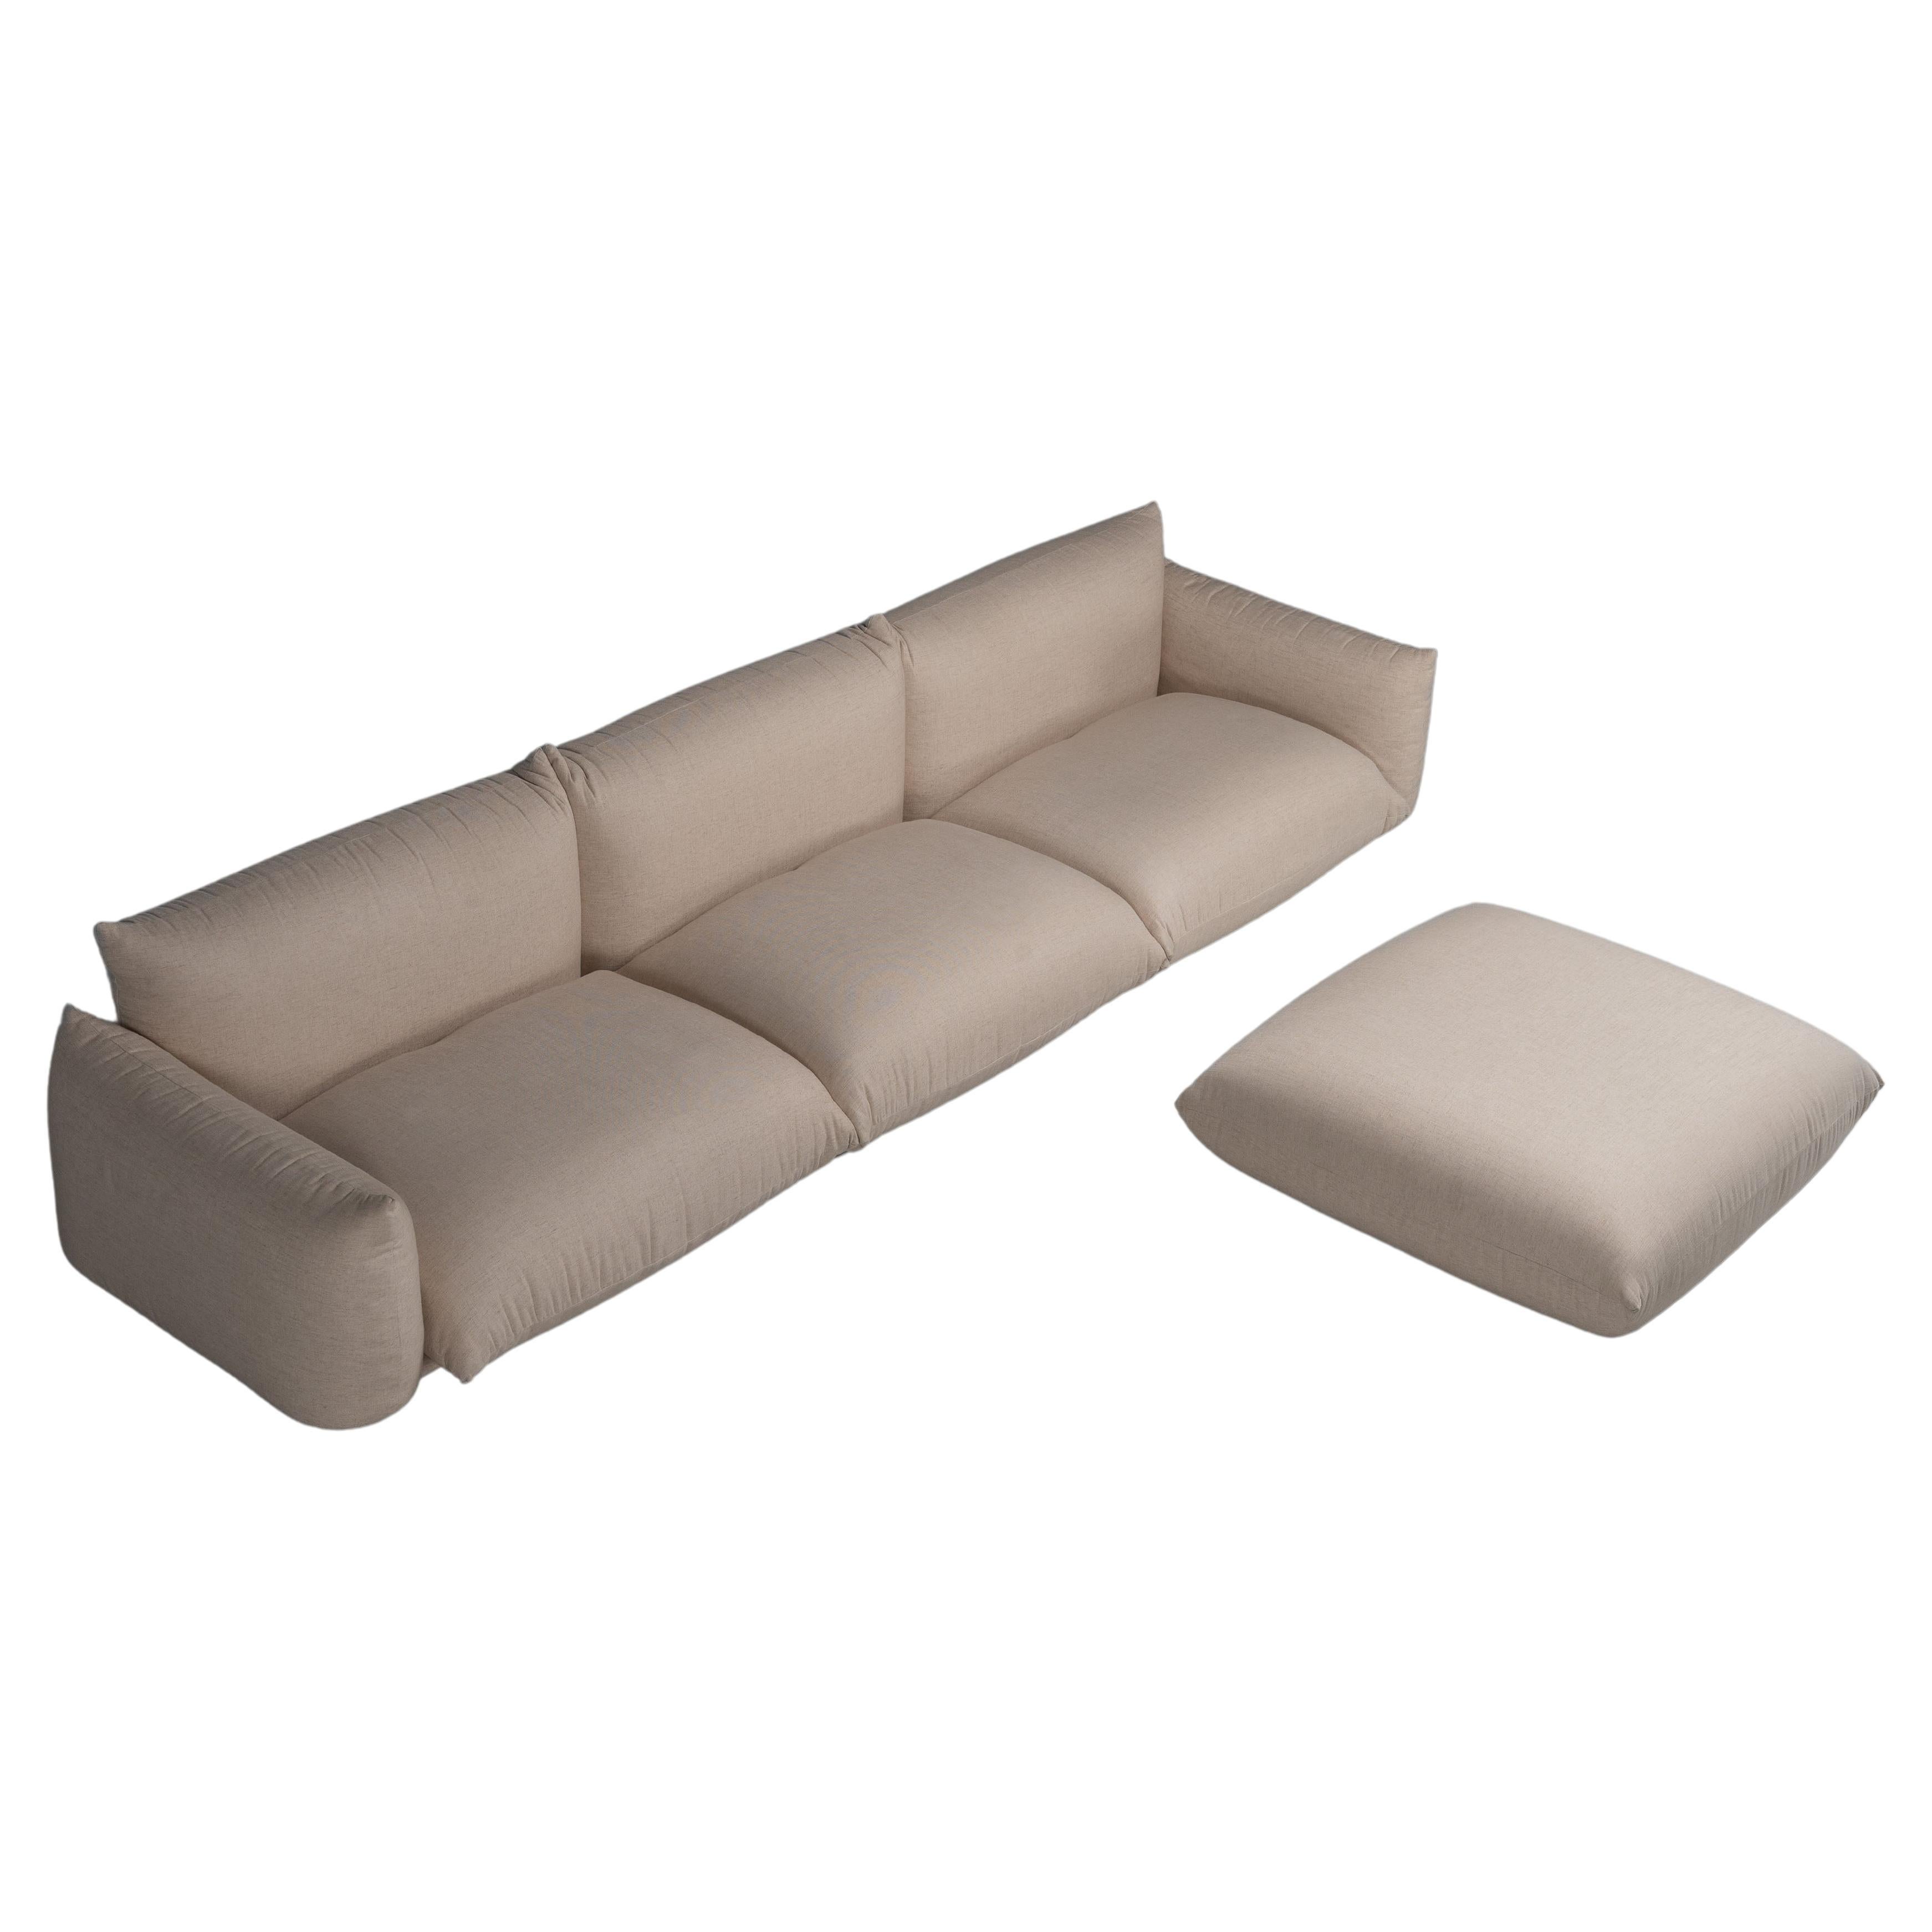 Mario Marenco sofa and poof Arflex Italy 1971 For Sale